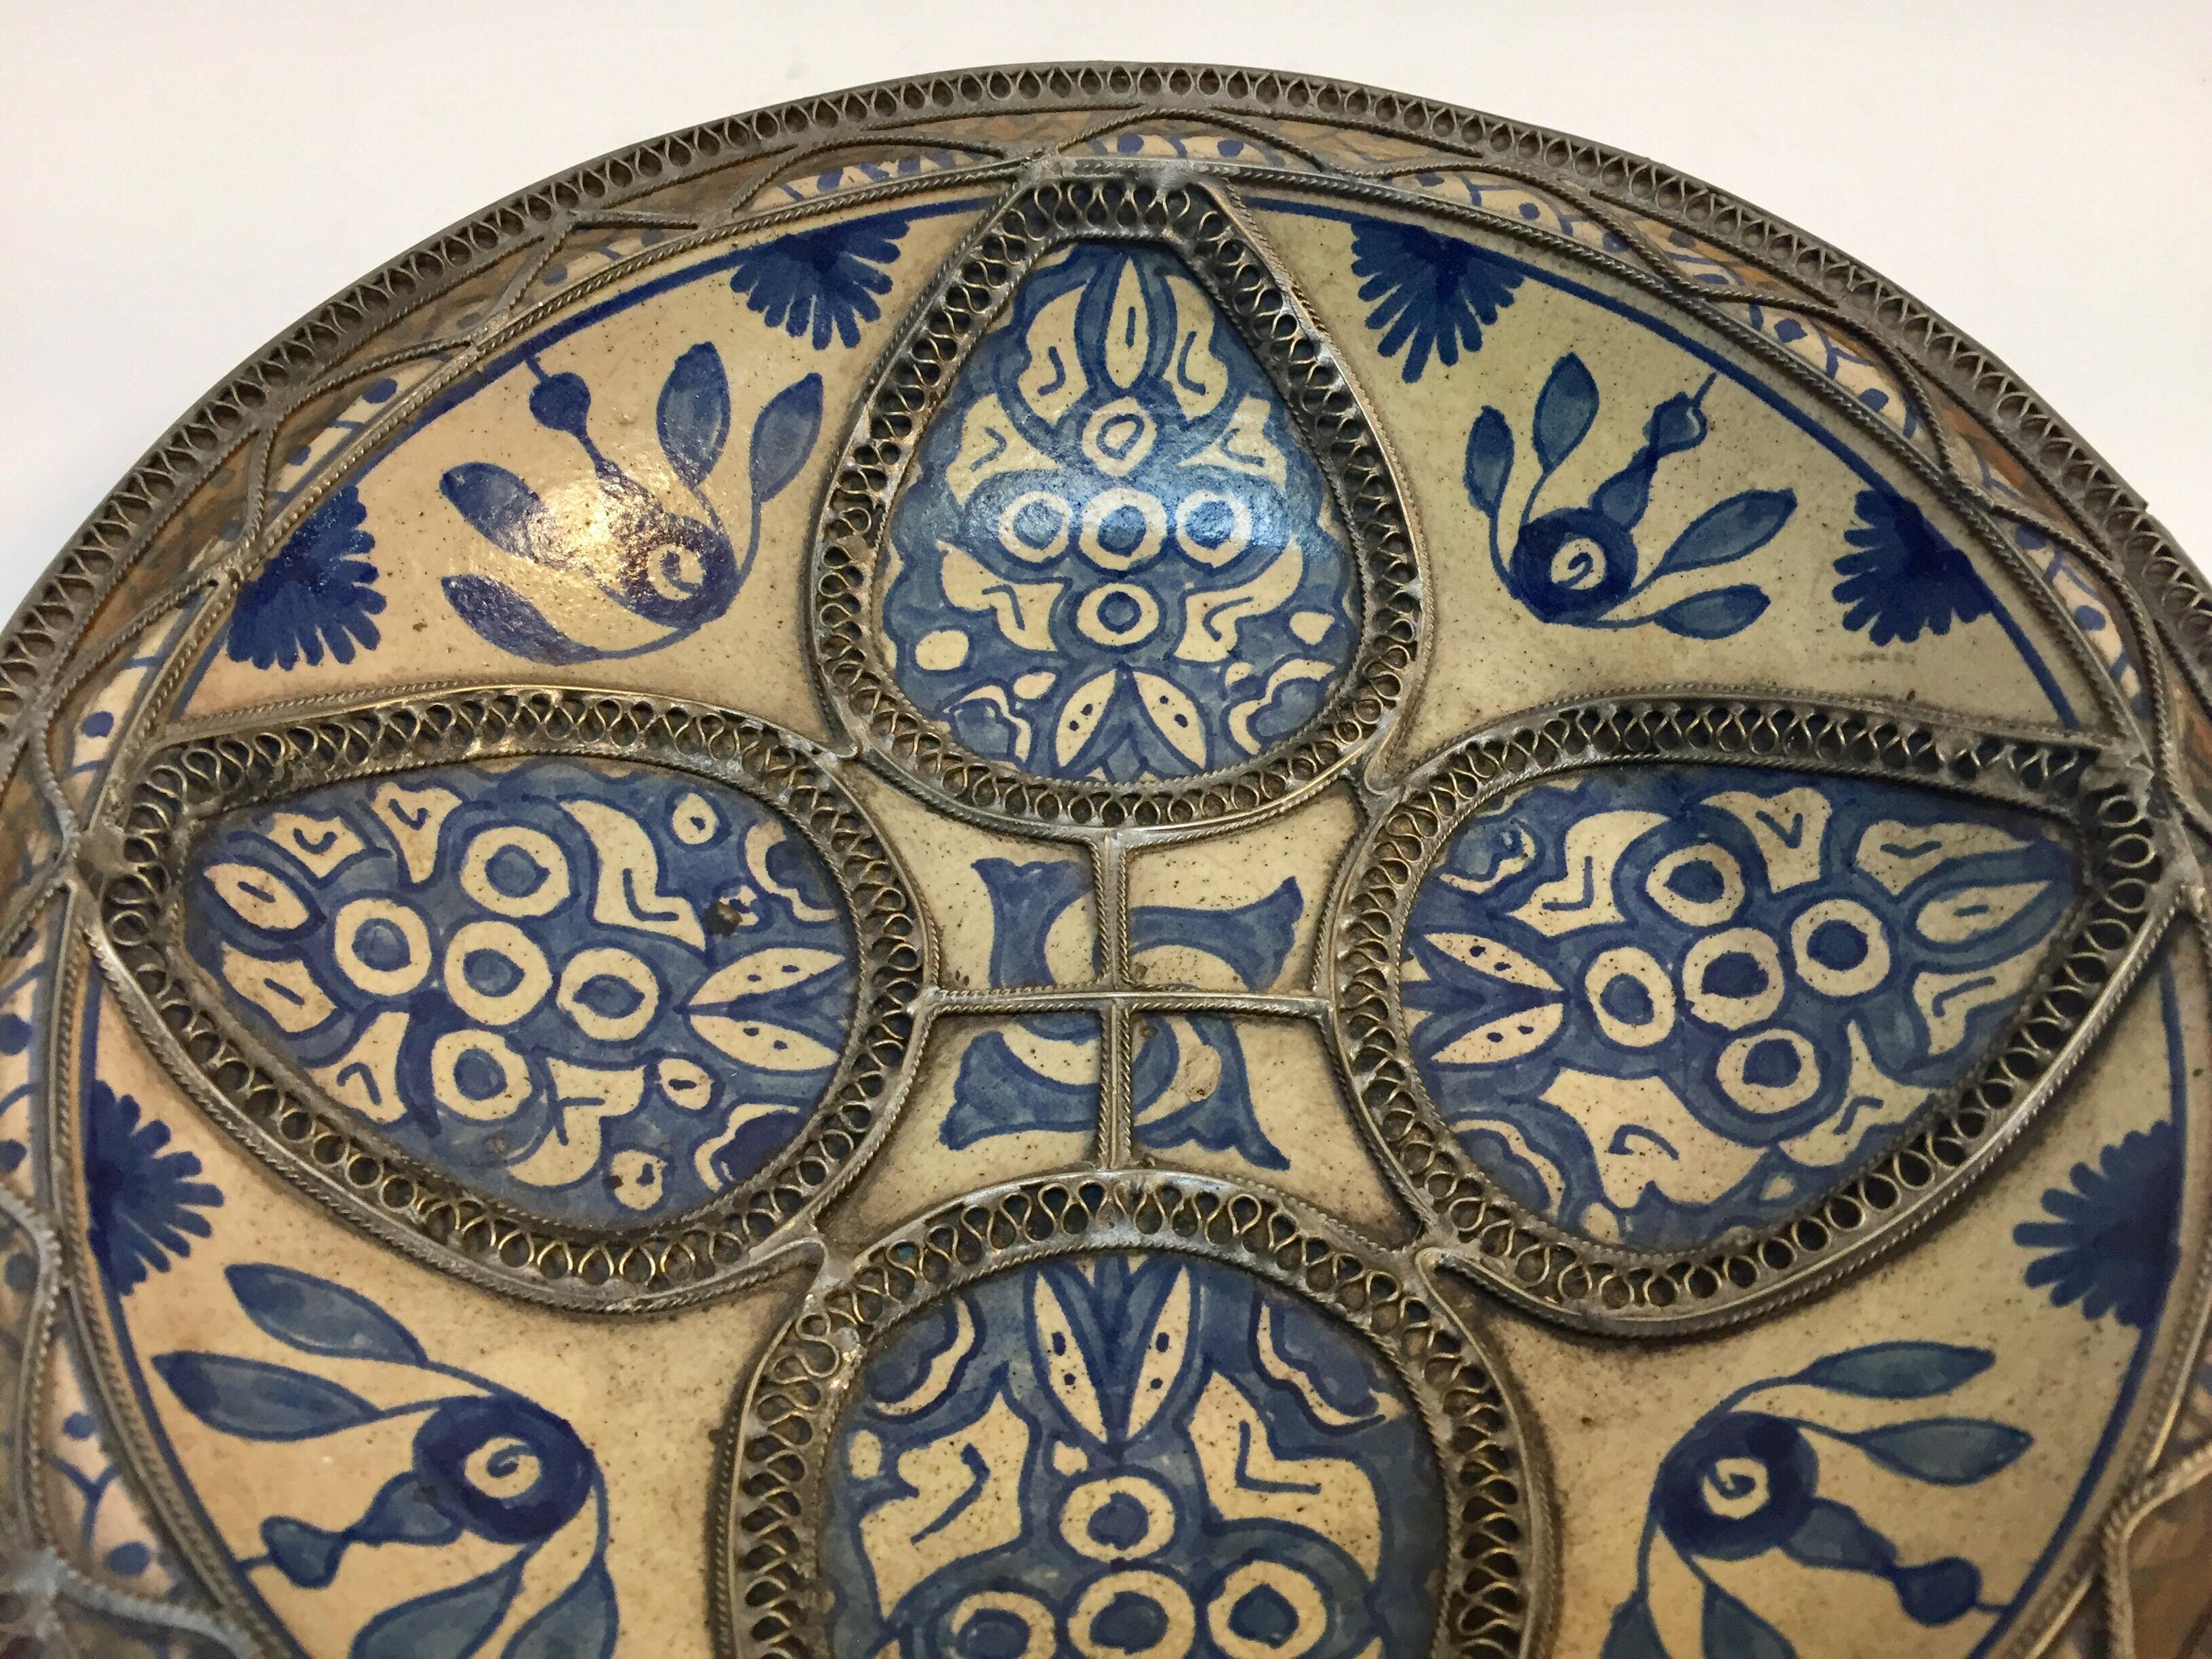 20th Century Moroccan Ceramic Plate Adorned with Silver Filigree from Fez